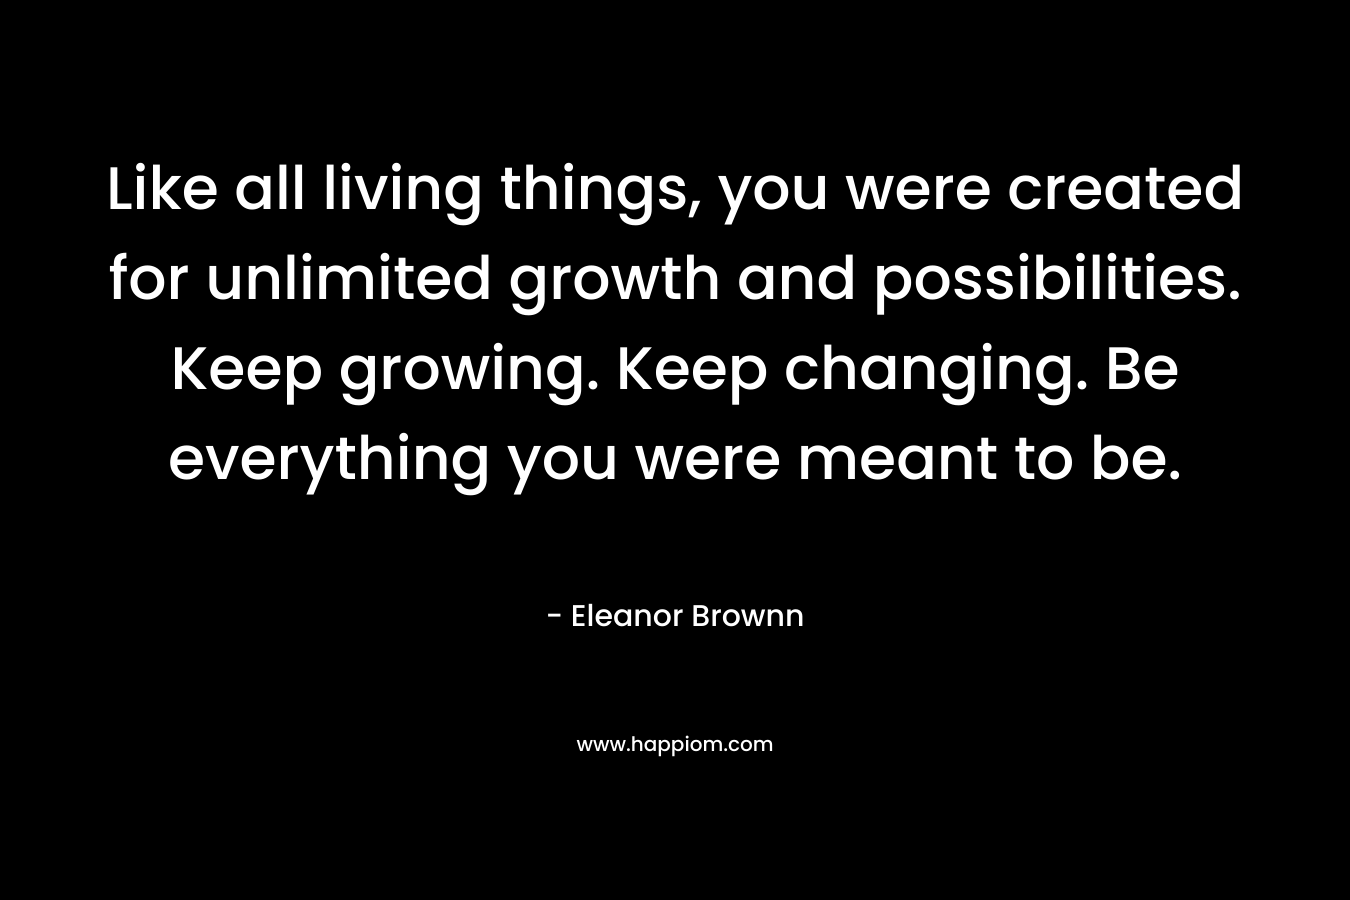 Like all living things, you were created for unlimited growth and possibilities. Keep growing. Keep changing. Be everything you were meant to be. – Eleanor Brownn